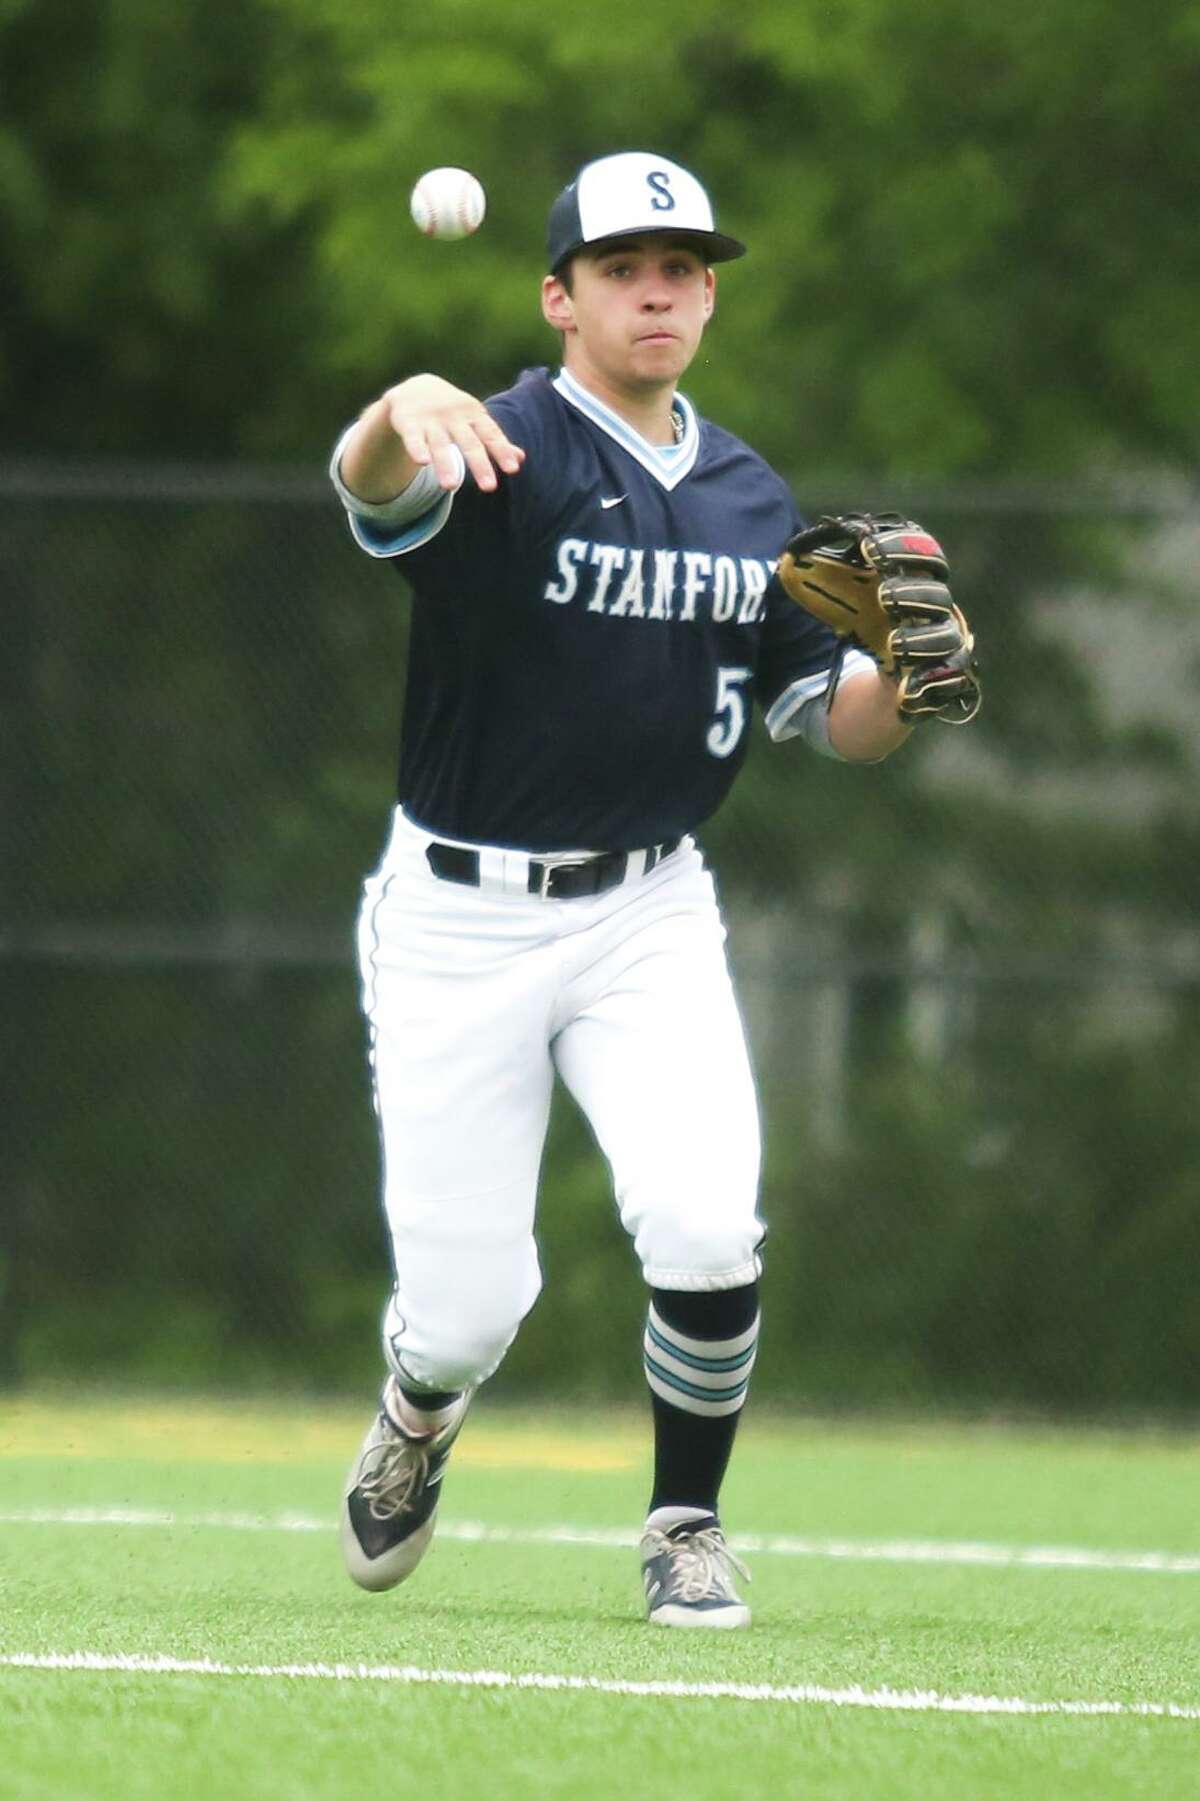 TJ Wainwright fields a ground ball during Stamford’s victory over Norwalk in 2018.